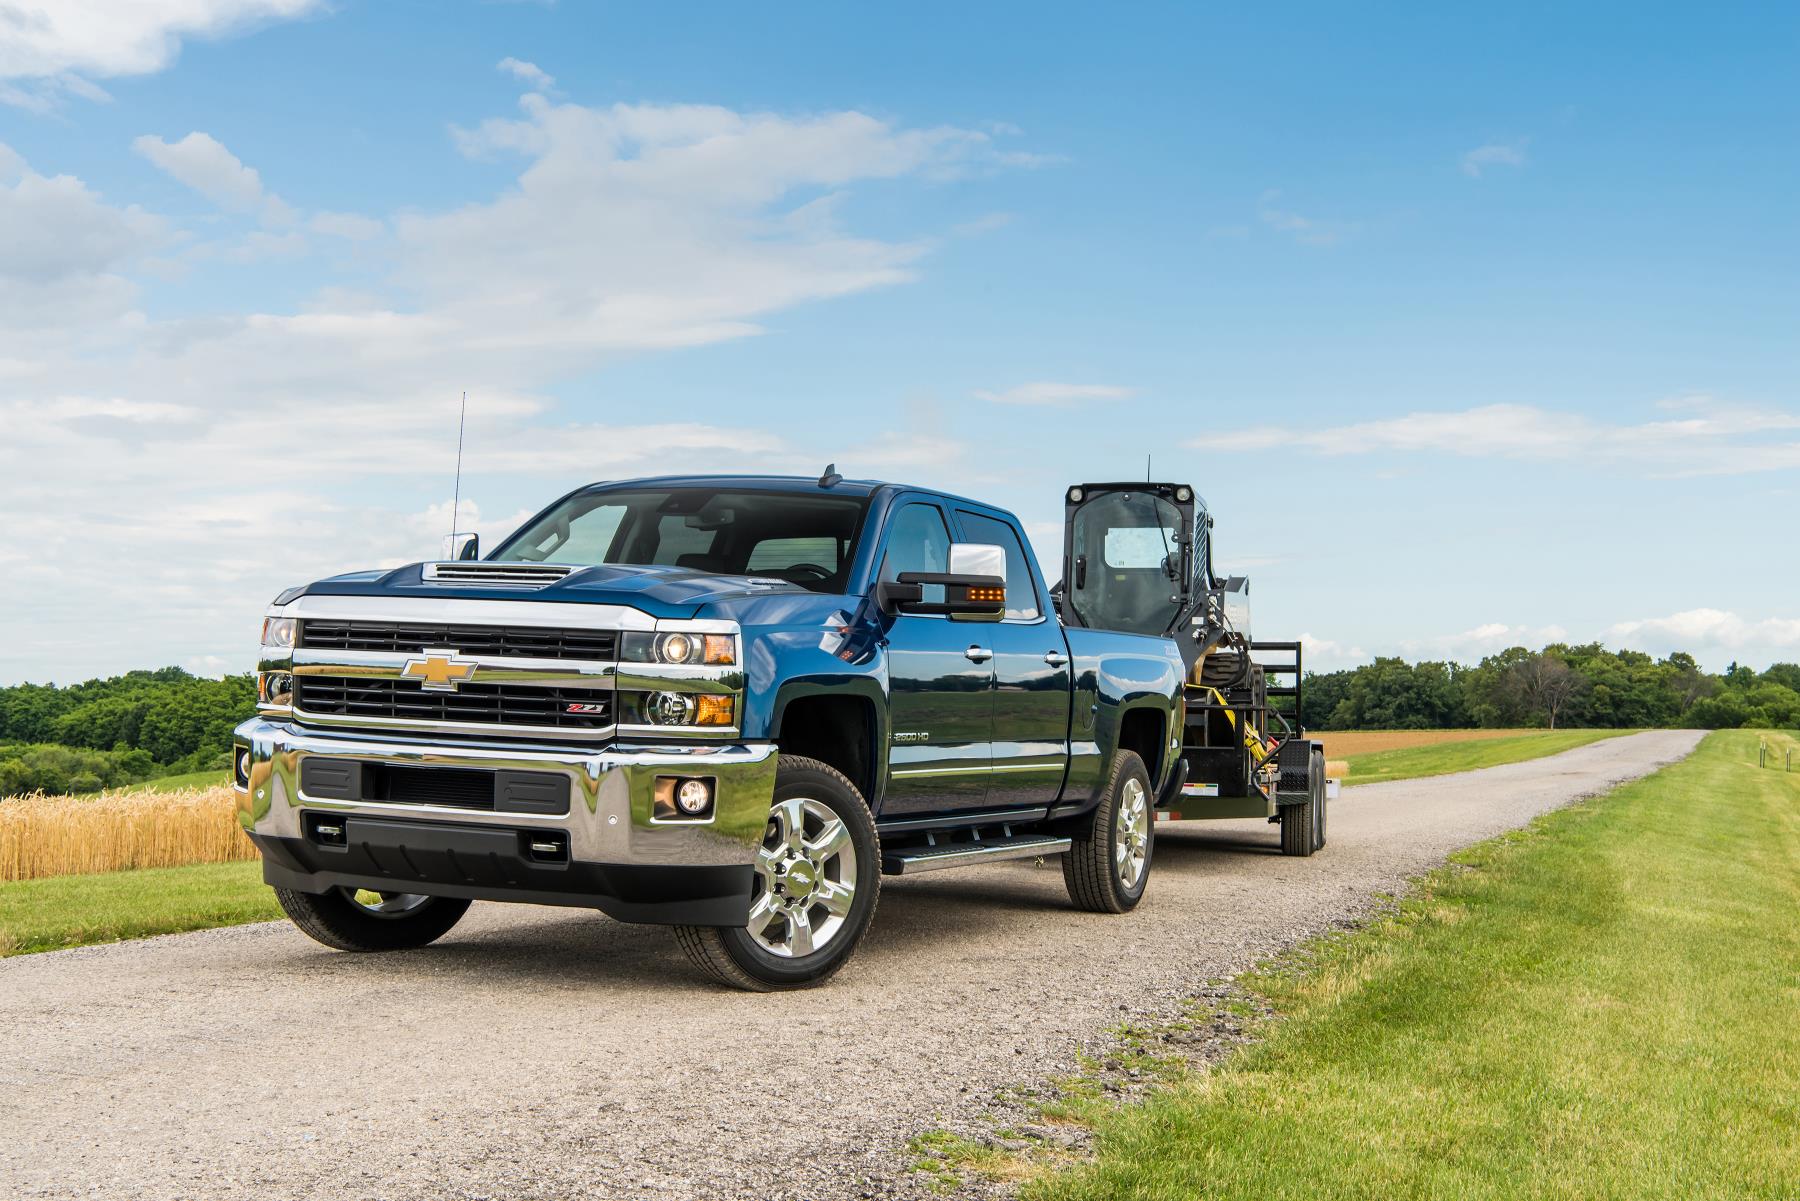 Chevrolet Silverado, one of Chevrolet's top selling vehicles in calendar year 2017